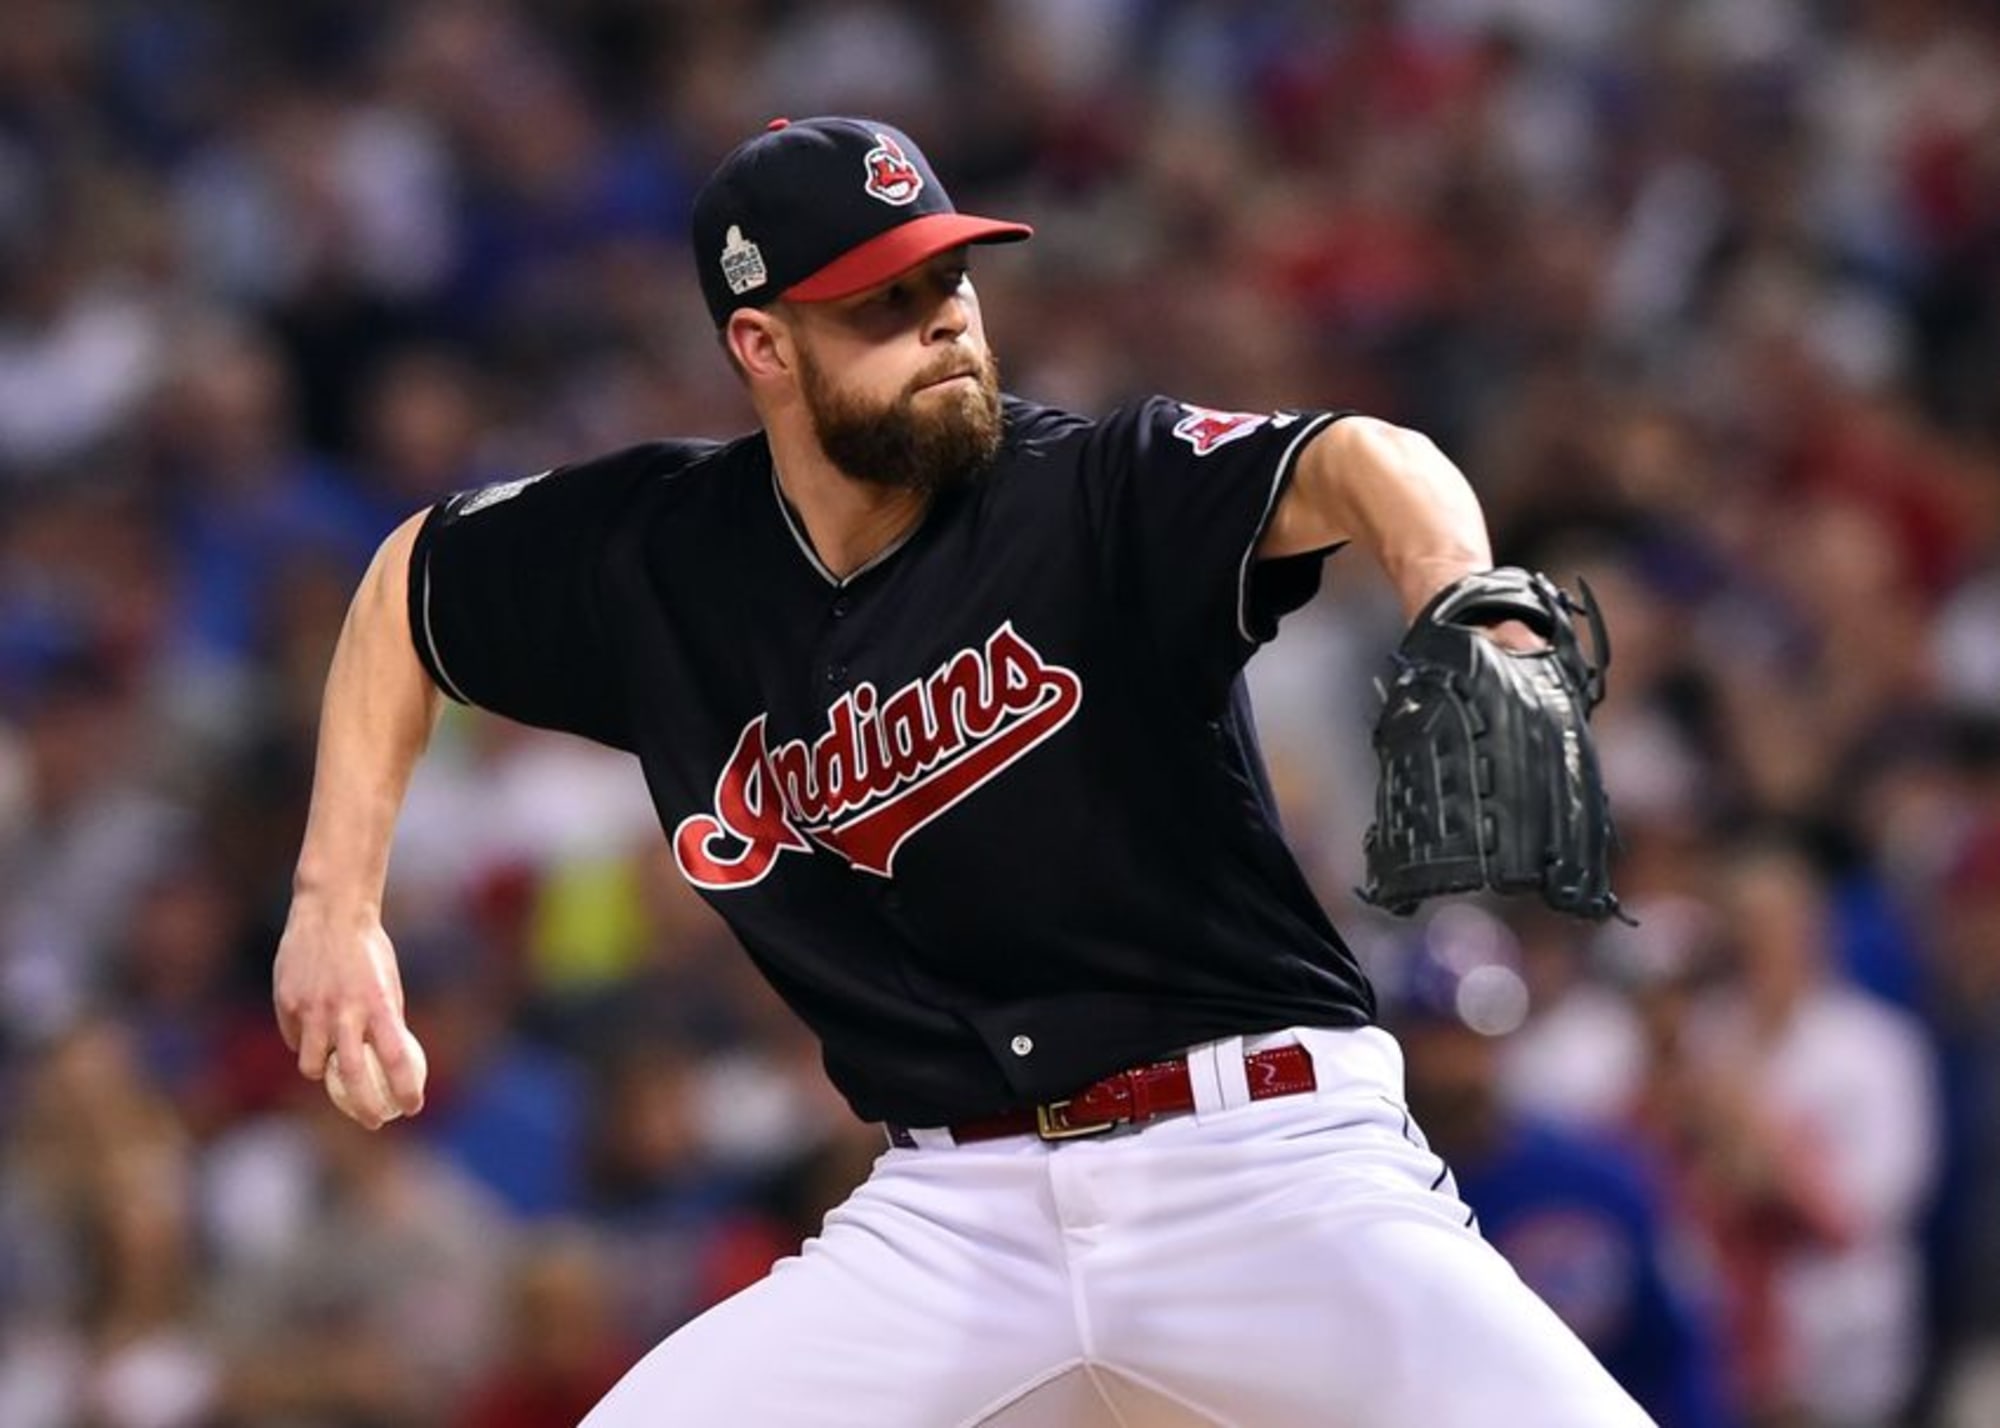 Cleveland Indians: Corey Kluber Fends Off Coyote with Fastball